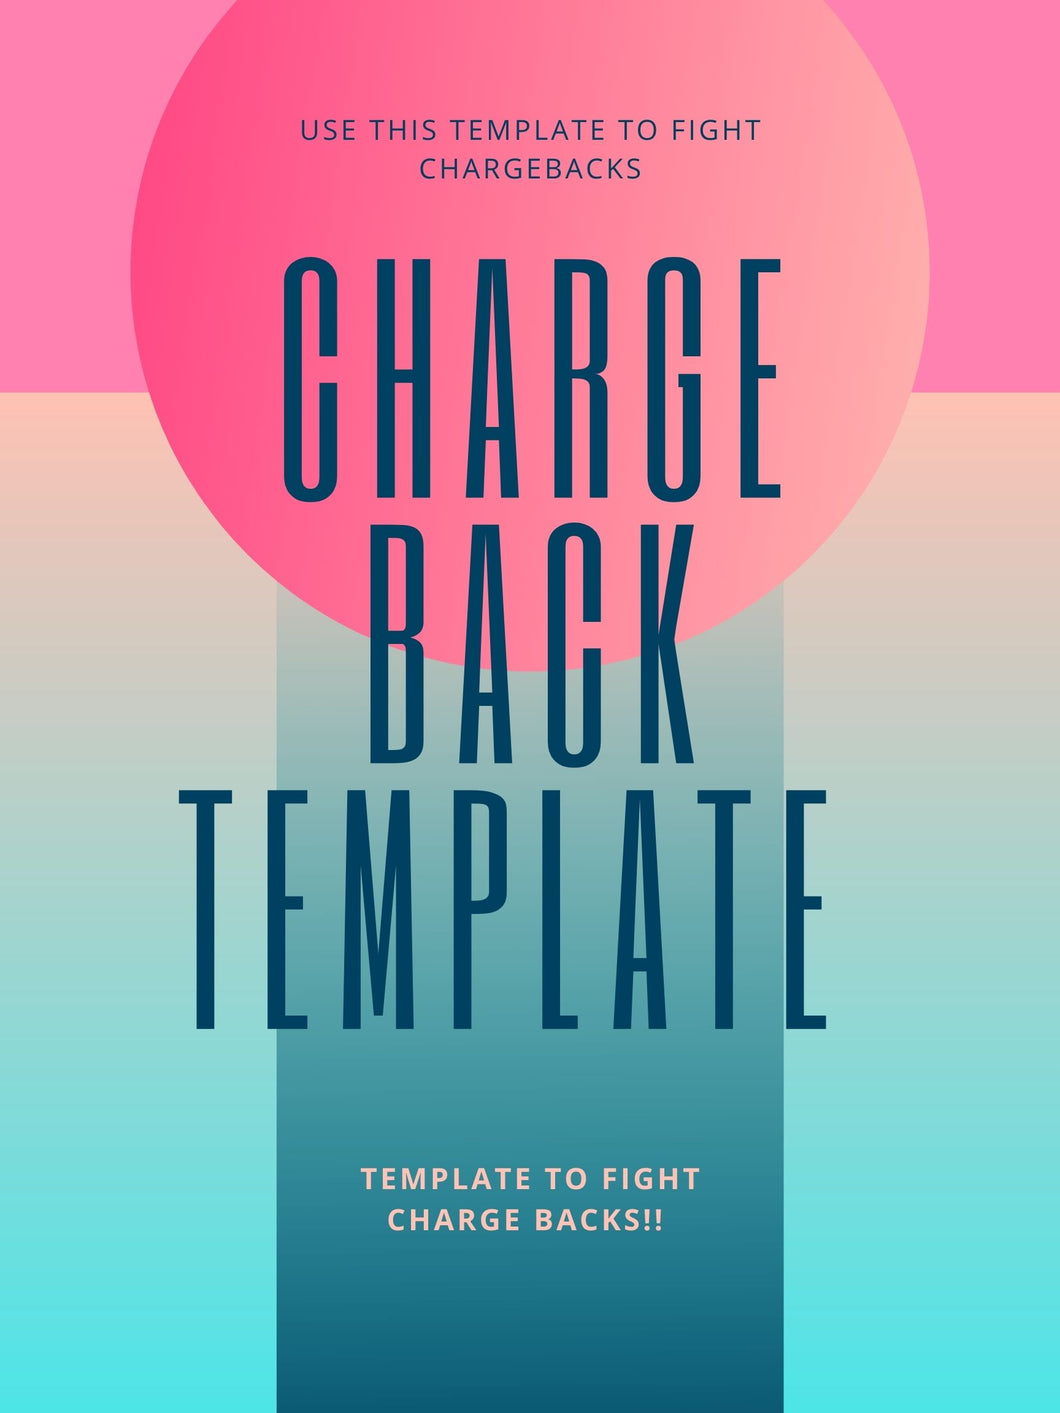 CHARGEBACK TEMPLATE